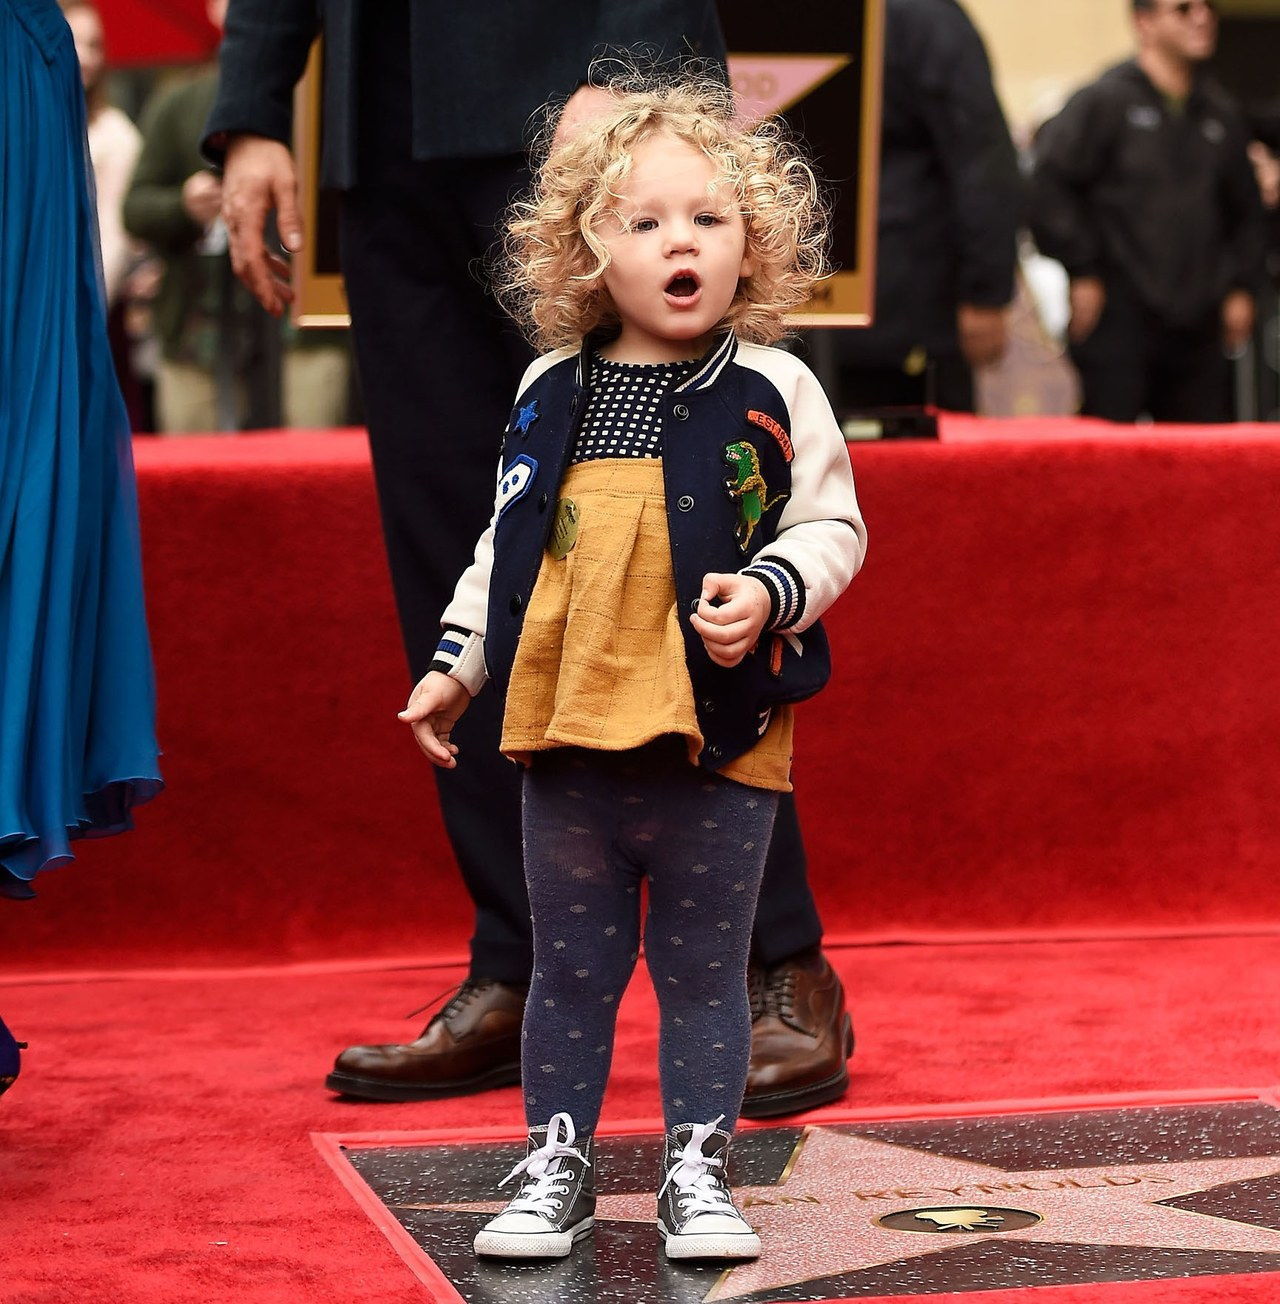 HOLLYWOOD, CA - DECEMBER 15: Actors Ryan Reynolds pose for a photo with his daughter James Reynolds as Ryan Reynolds is honored with star on the Hollywood Walk of Fame on December 15, 2016 in Hollywood, California. (Photo by Matt Winkelmeyer/Getty Images)